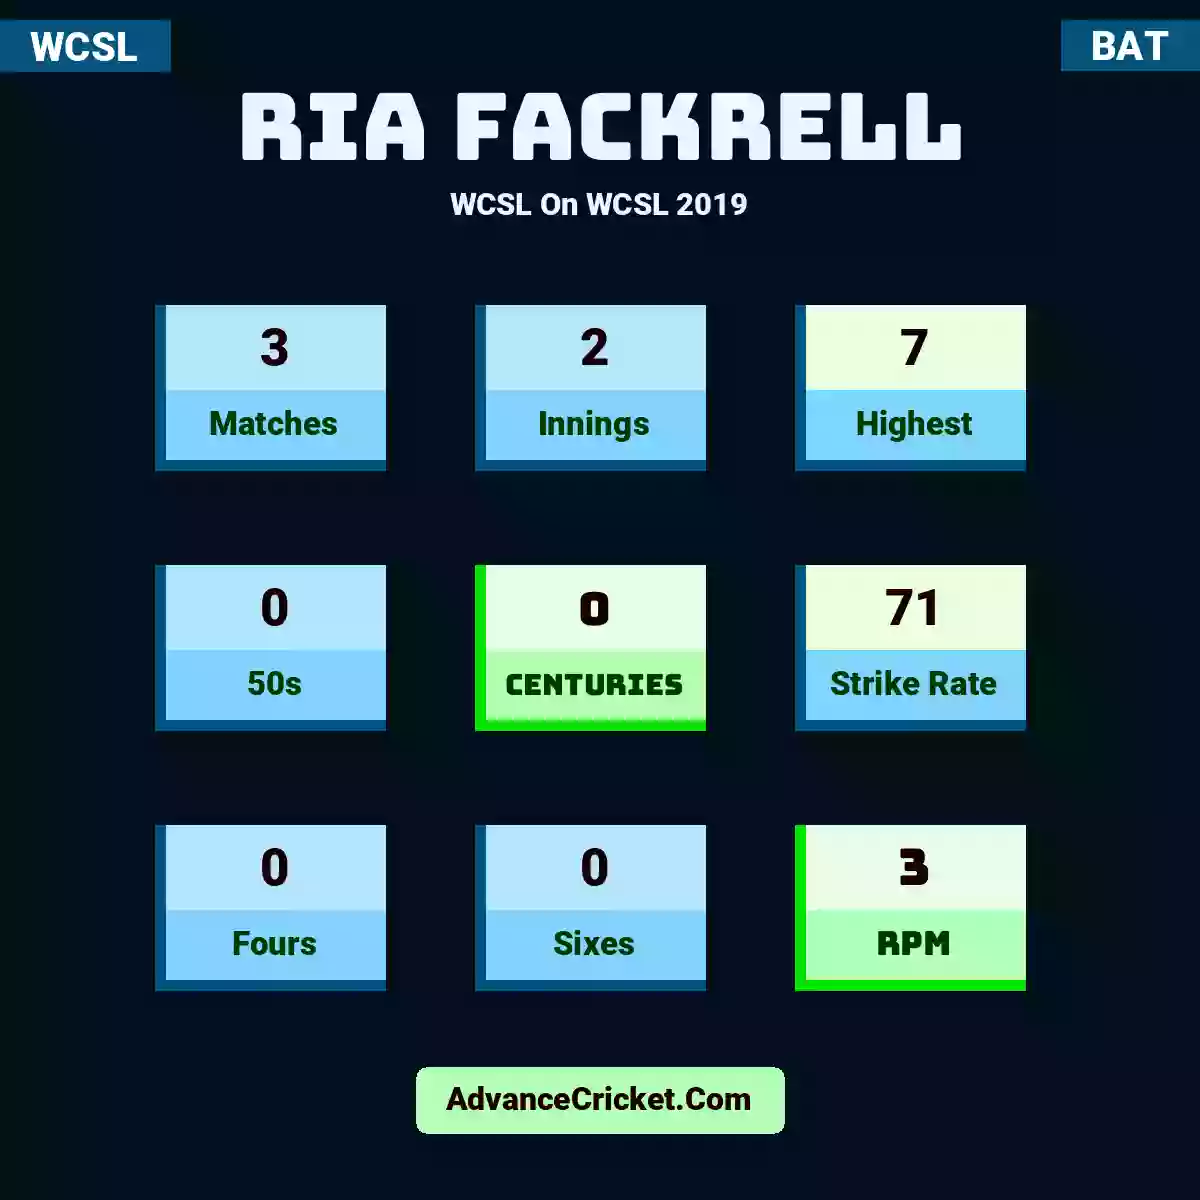 Ria Fackrell WCSL  On WCSL 2019, Ria Fackrell played 3 matches, scored 7 runs as highest, 0 half-centuries, and 0 centuries, with a strike rate of 71. R.Fackrell hit 0 fours and 0 sixes, with an RPM of 3.